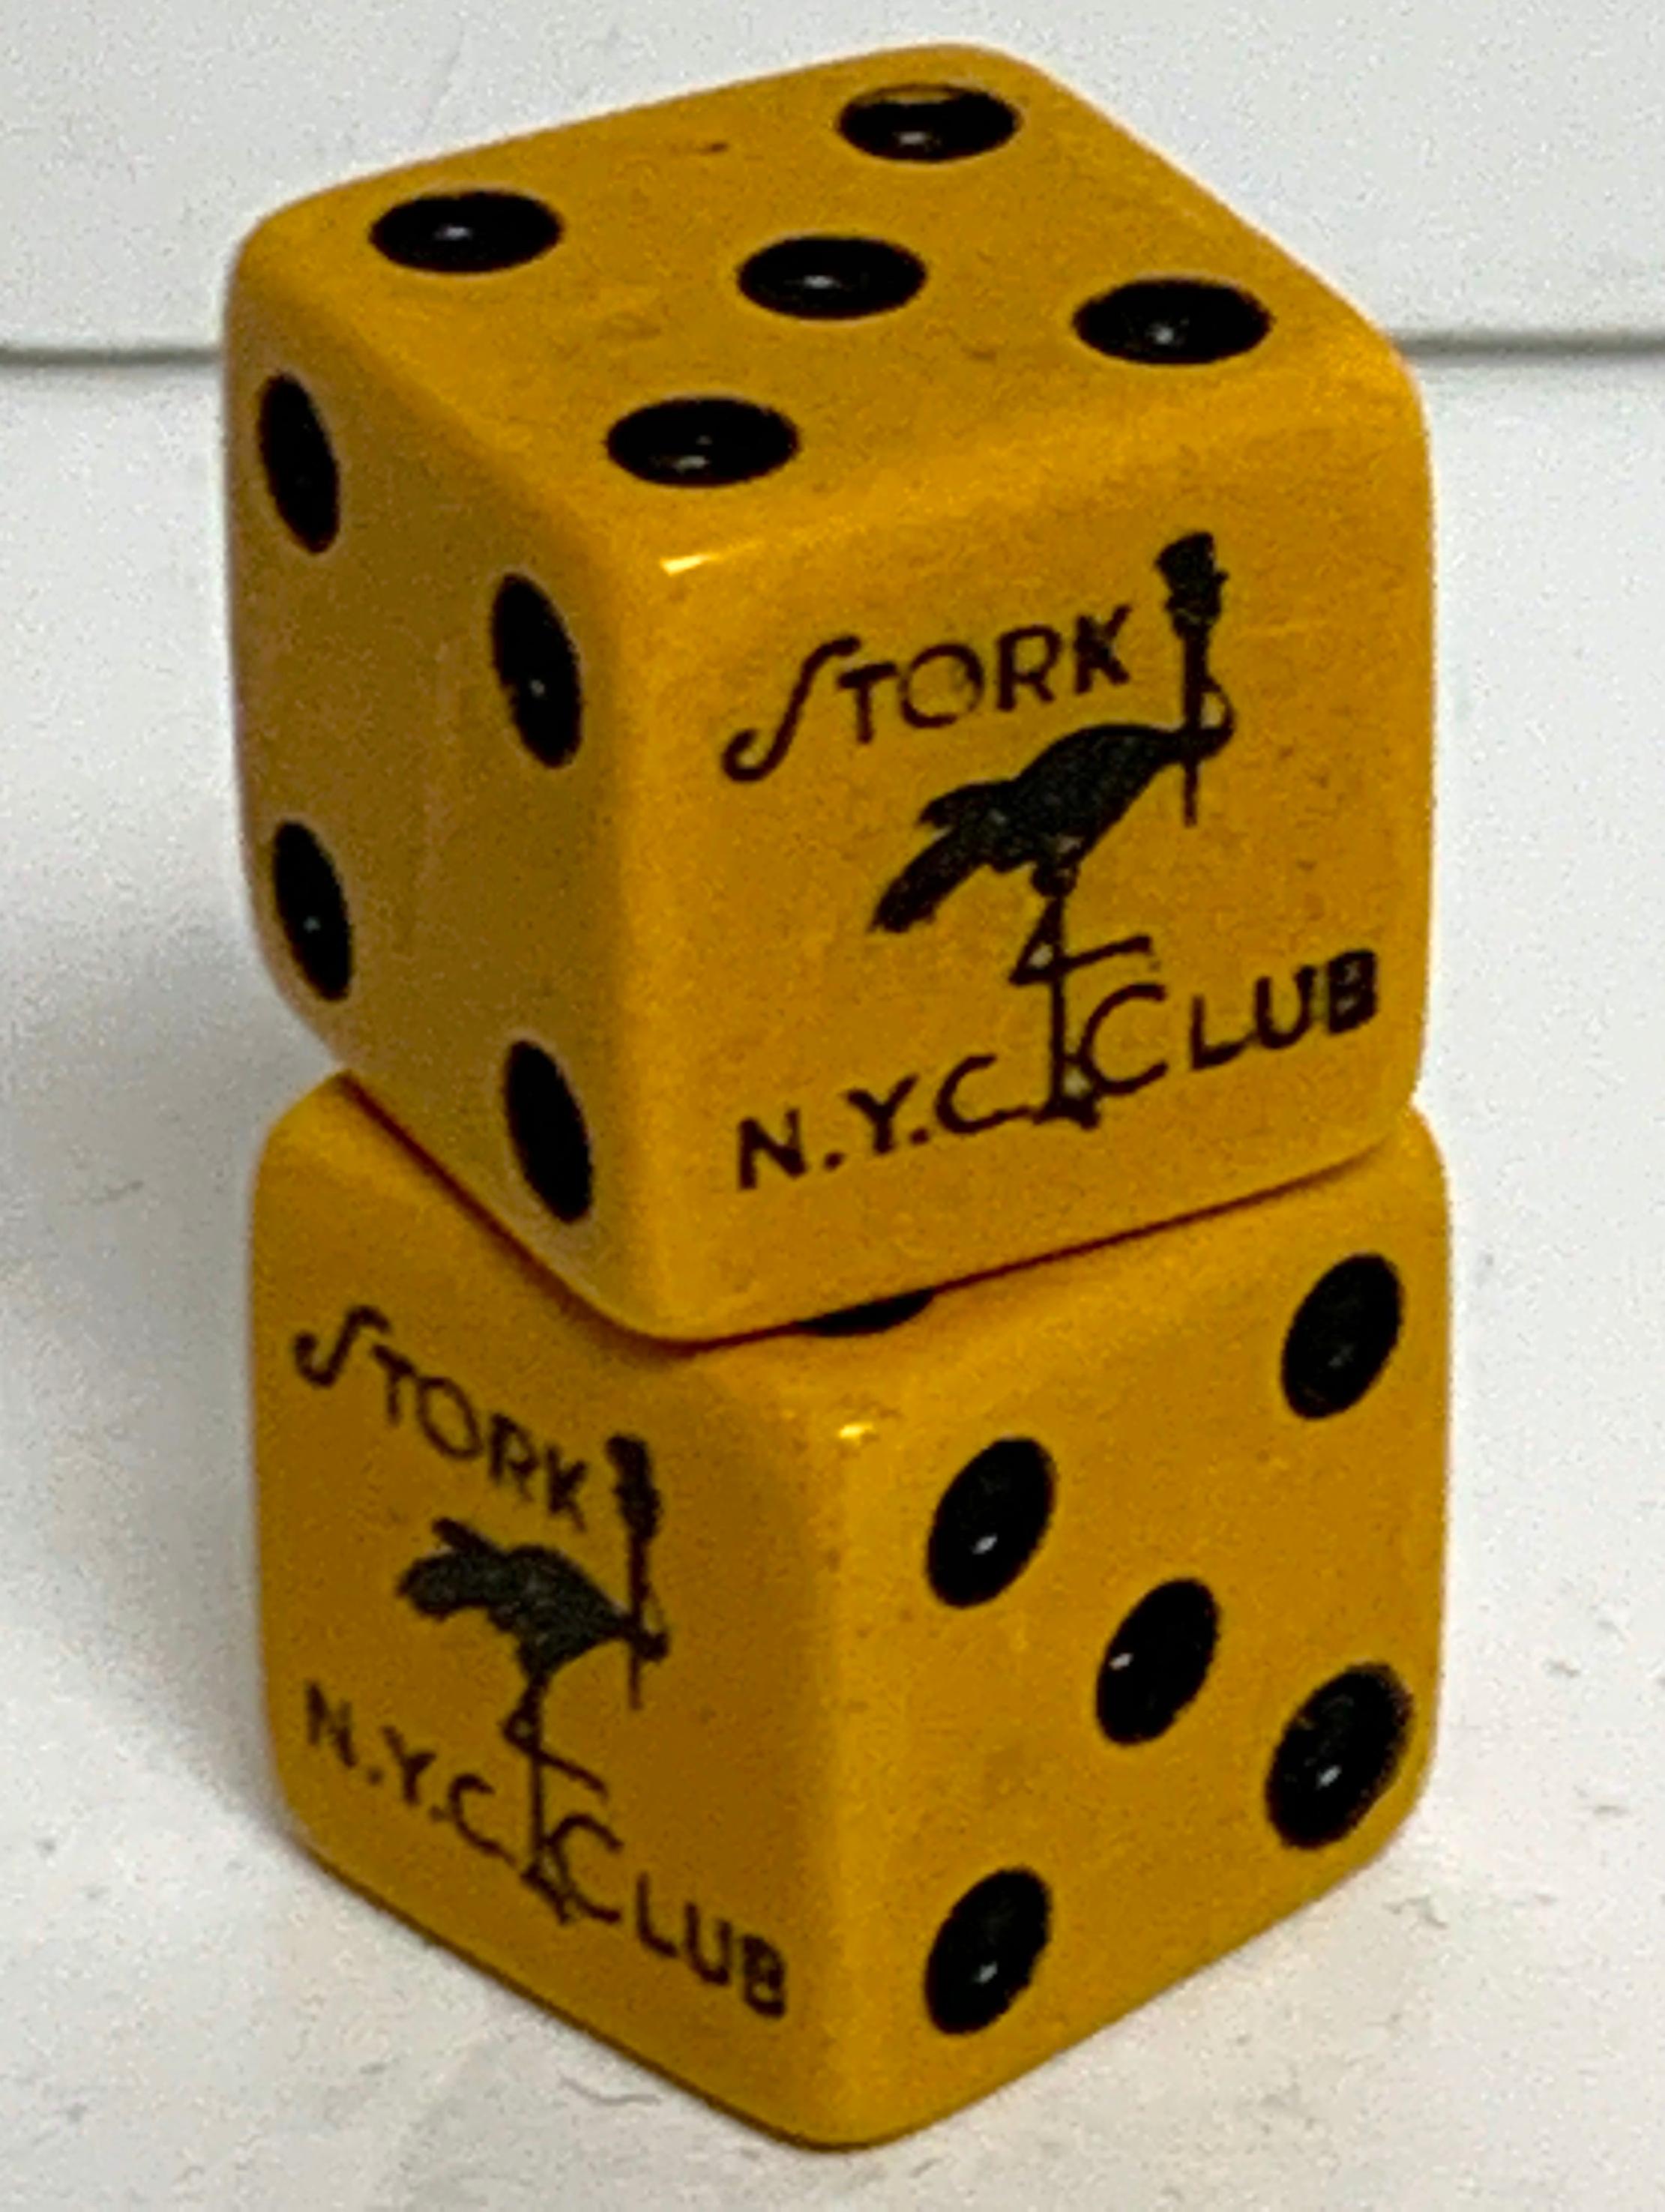 Pair of Stork Club NYC Bakelite dice, gambled with by Eva Gabor 
Each one with Stork Club logo on one side with 